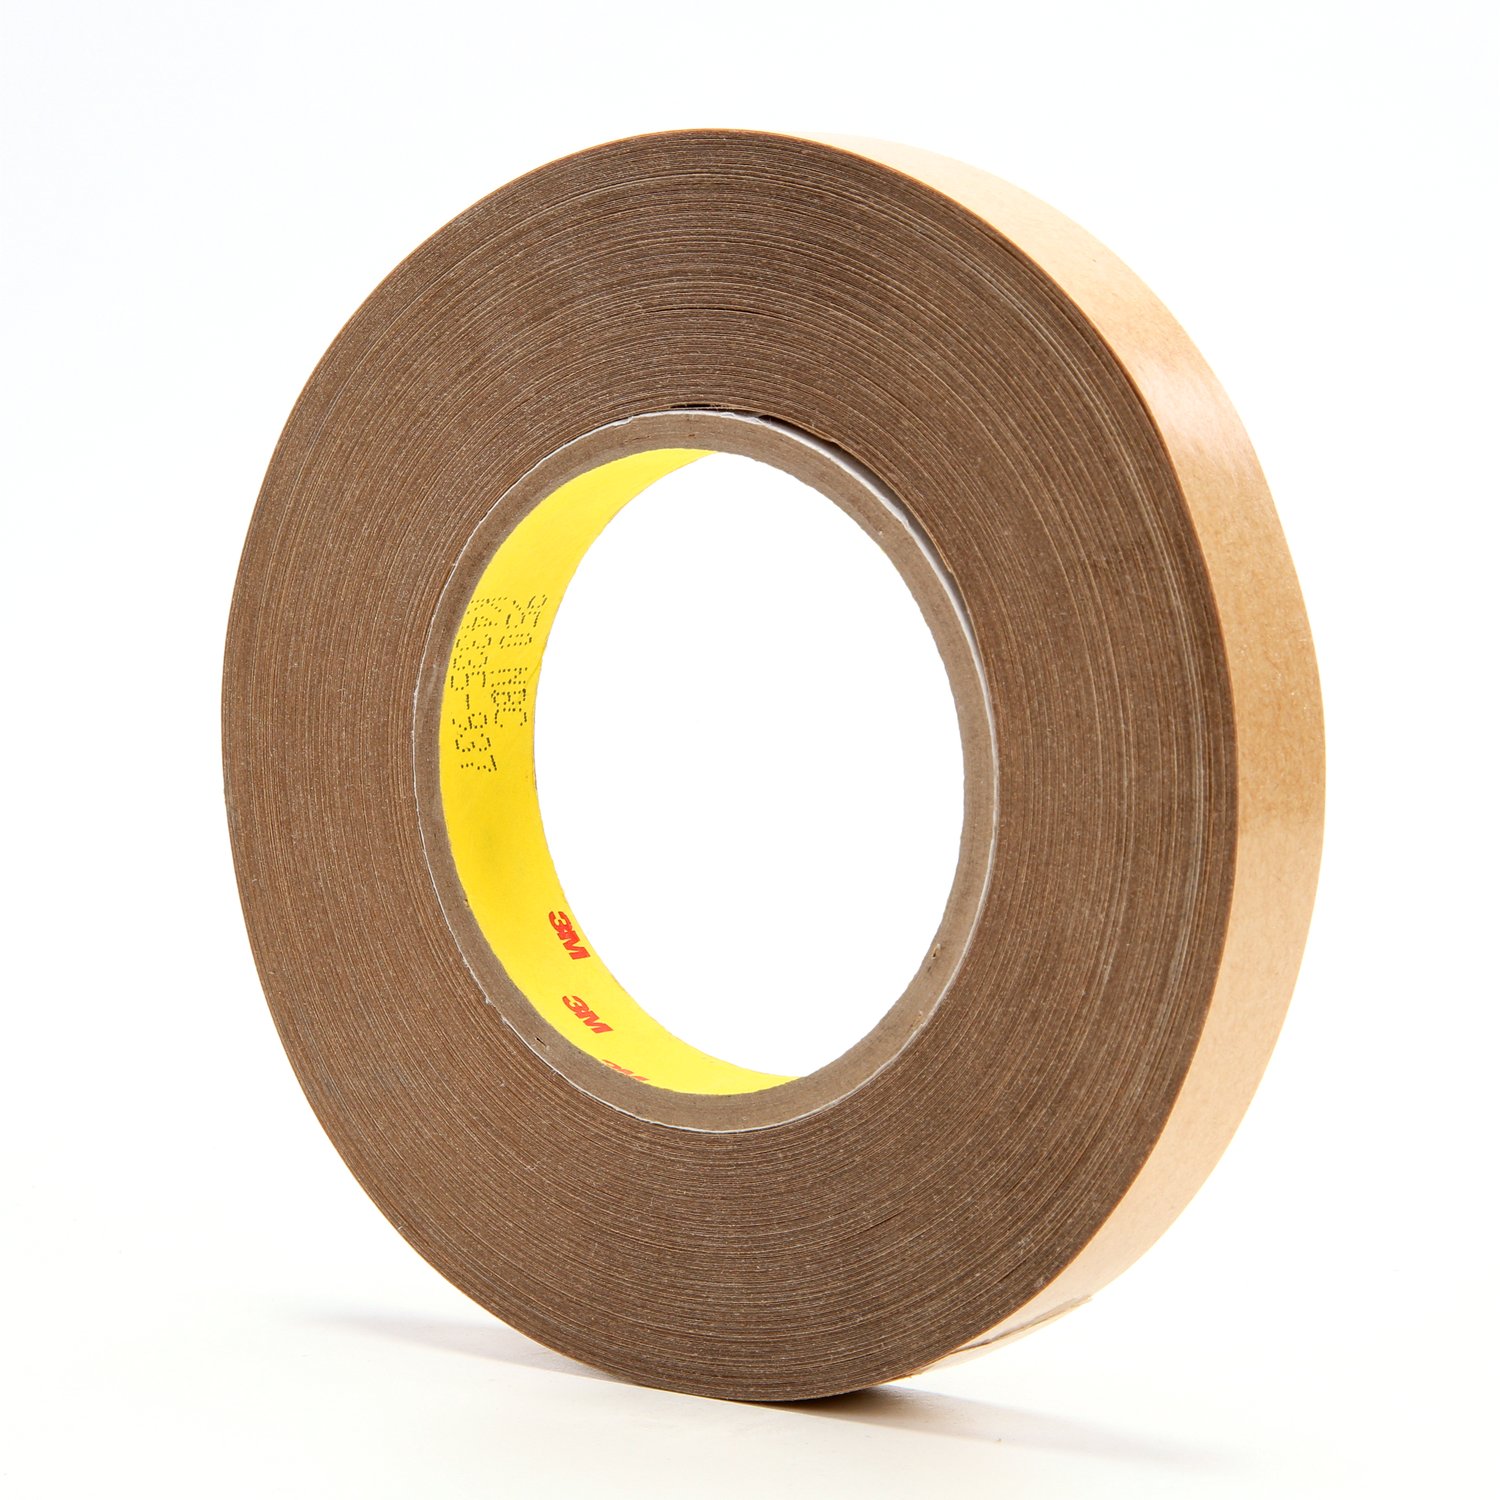 7000048416 - 3M Adhesive Transfer Tape 950, Clear, 3/4 in x 60 yd, 5 mil, 48 rolls
per case